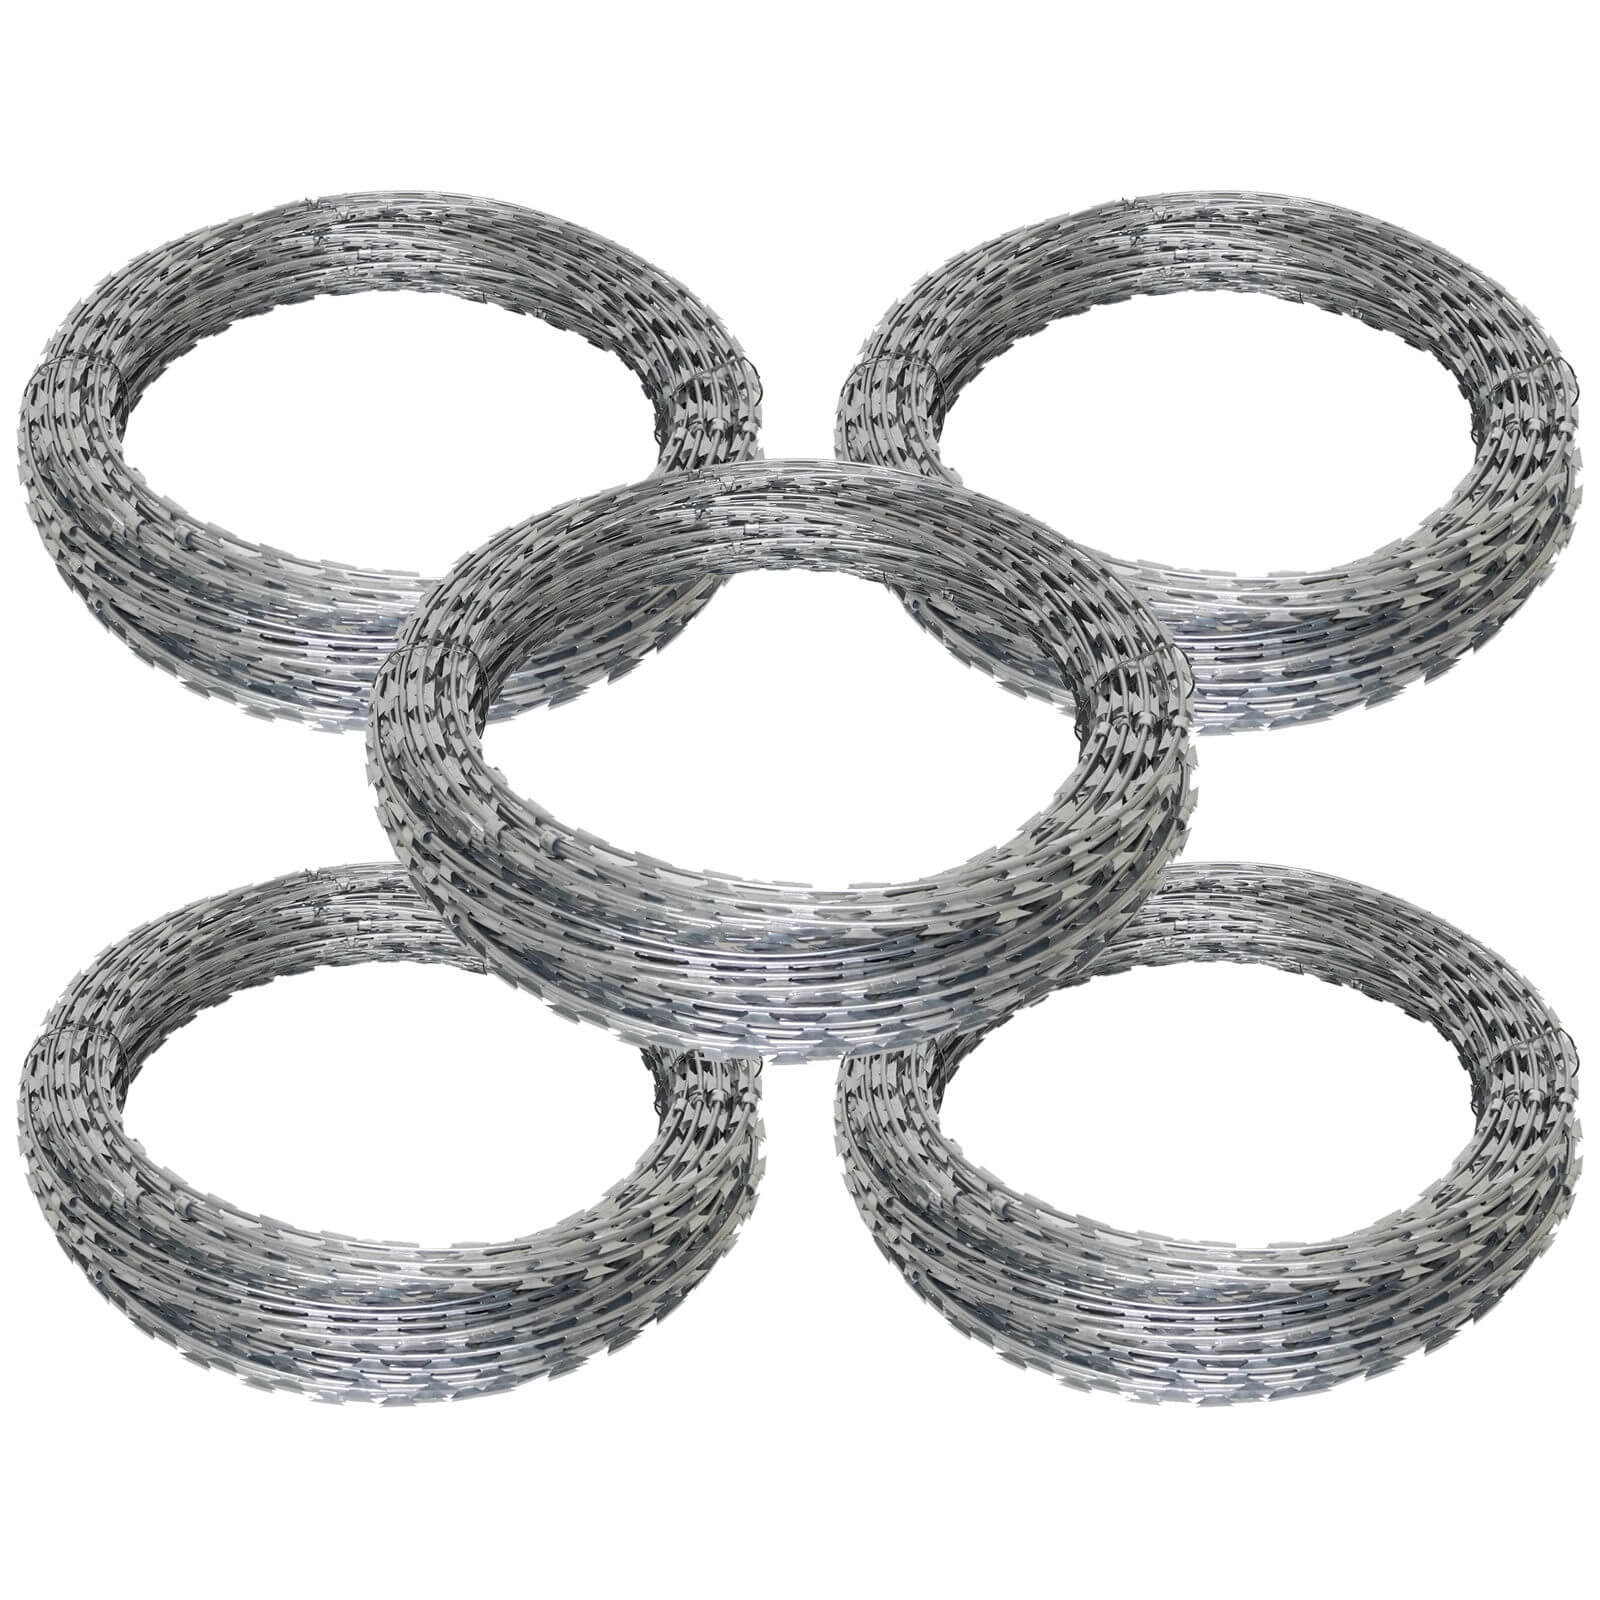 Choosing razor wire fencing for unparalleled security